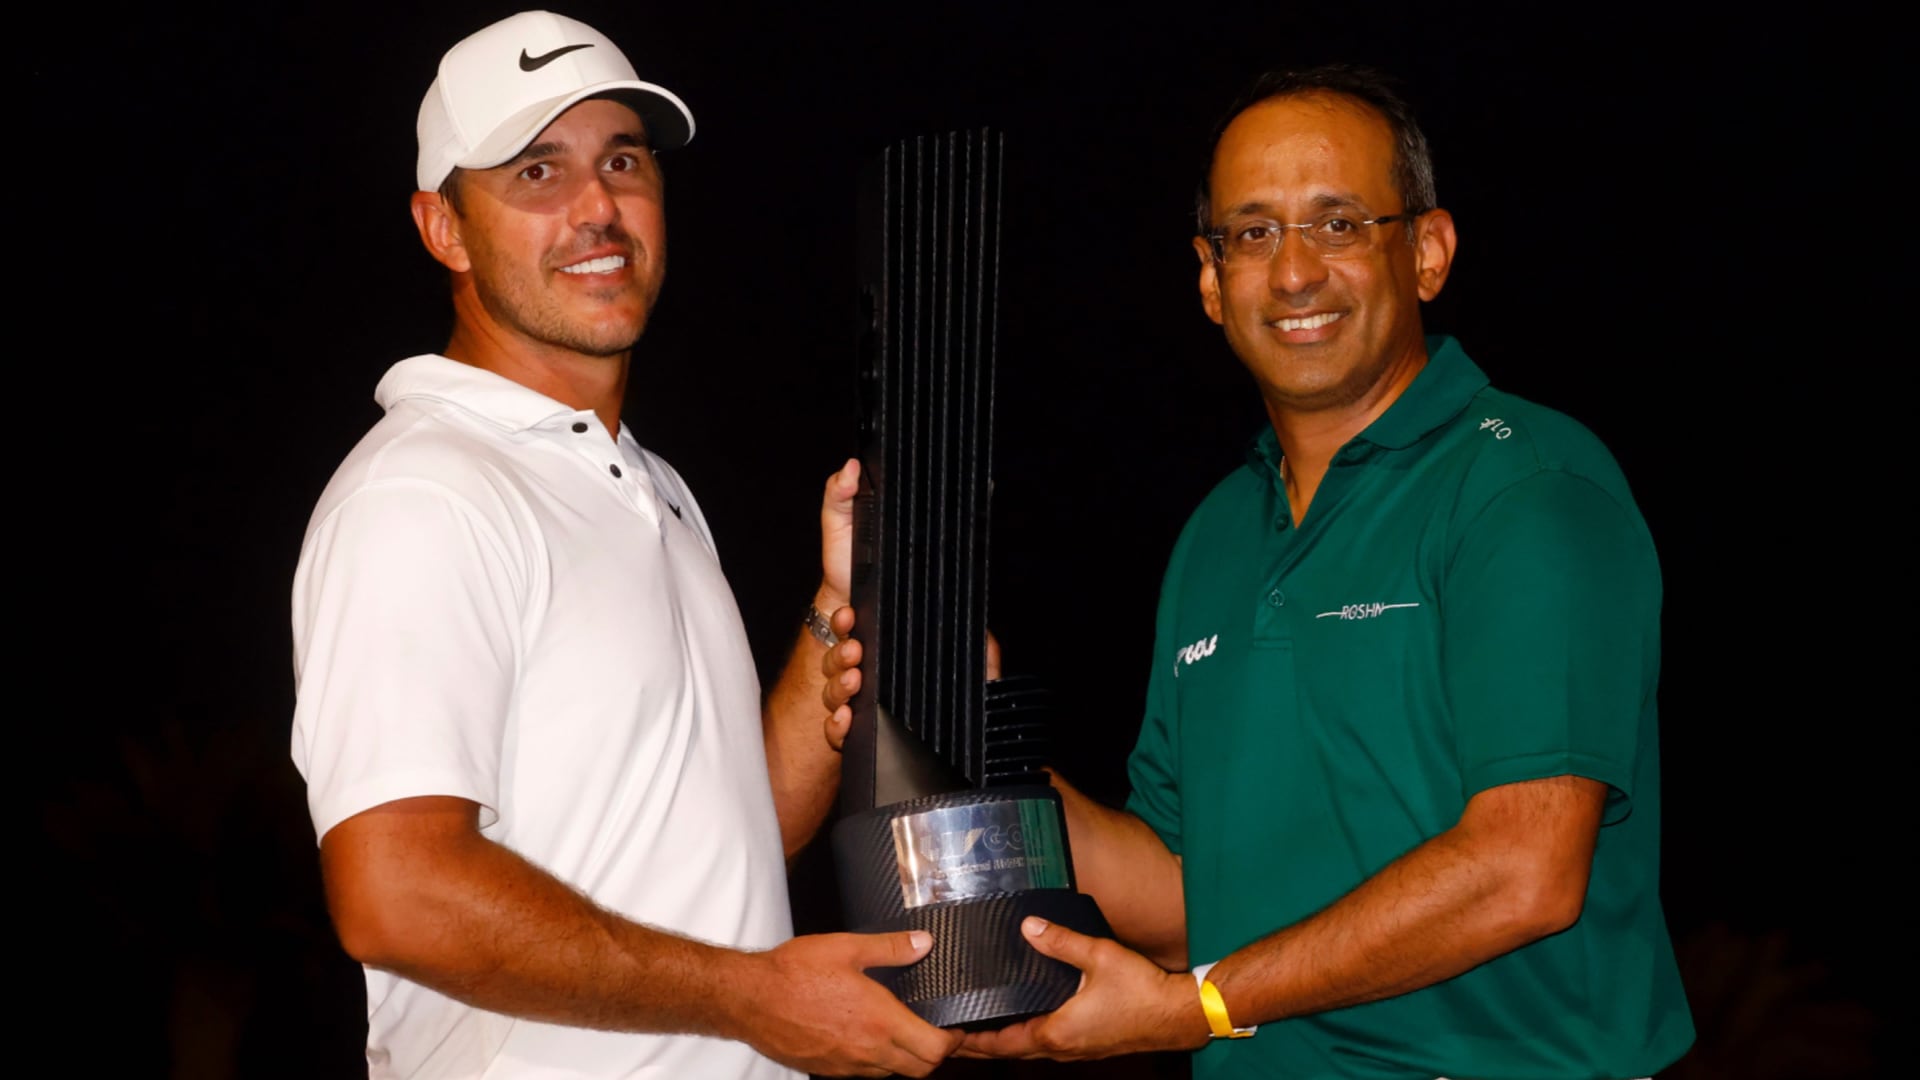 LIV Golf COO Atul Khosla resigns after one year with startup league